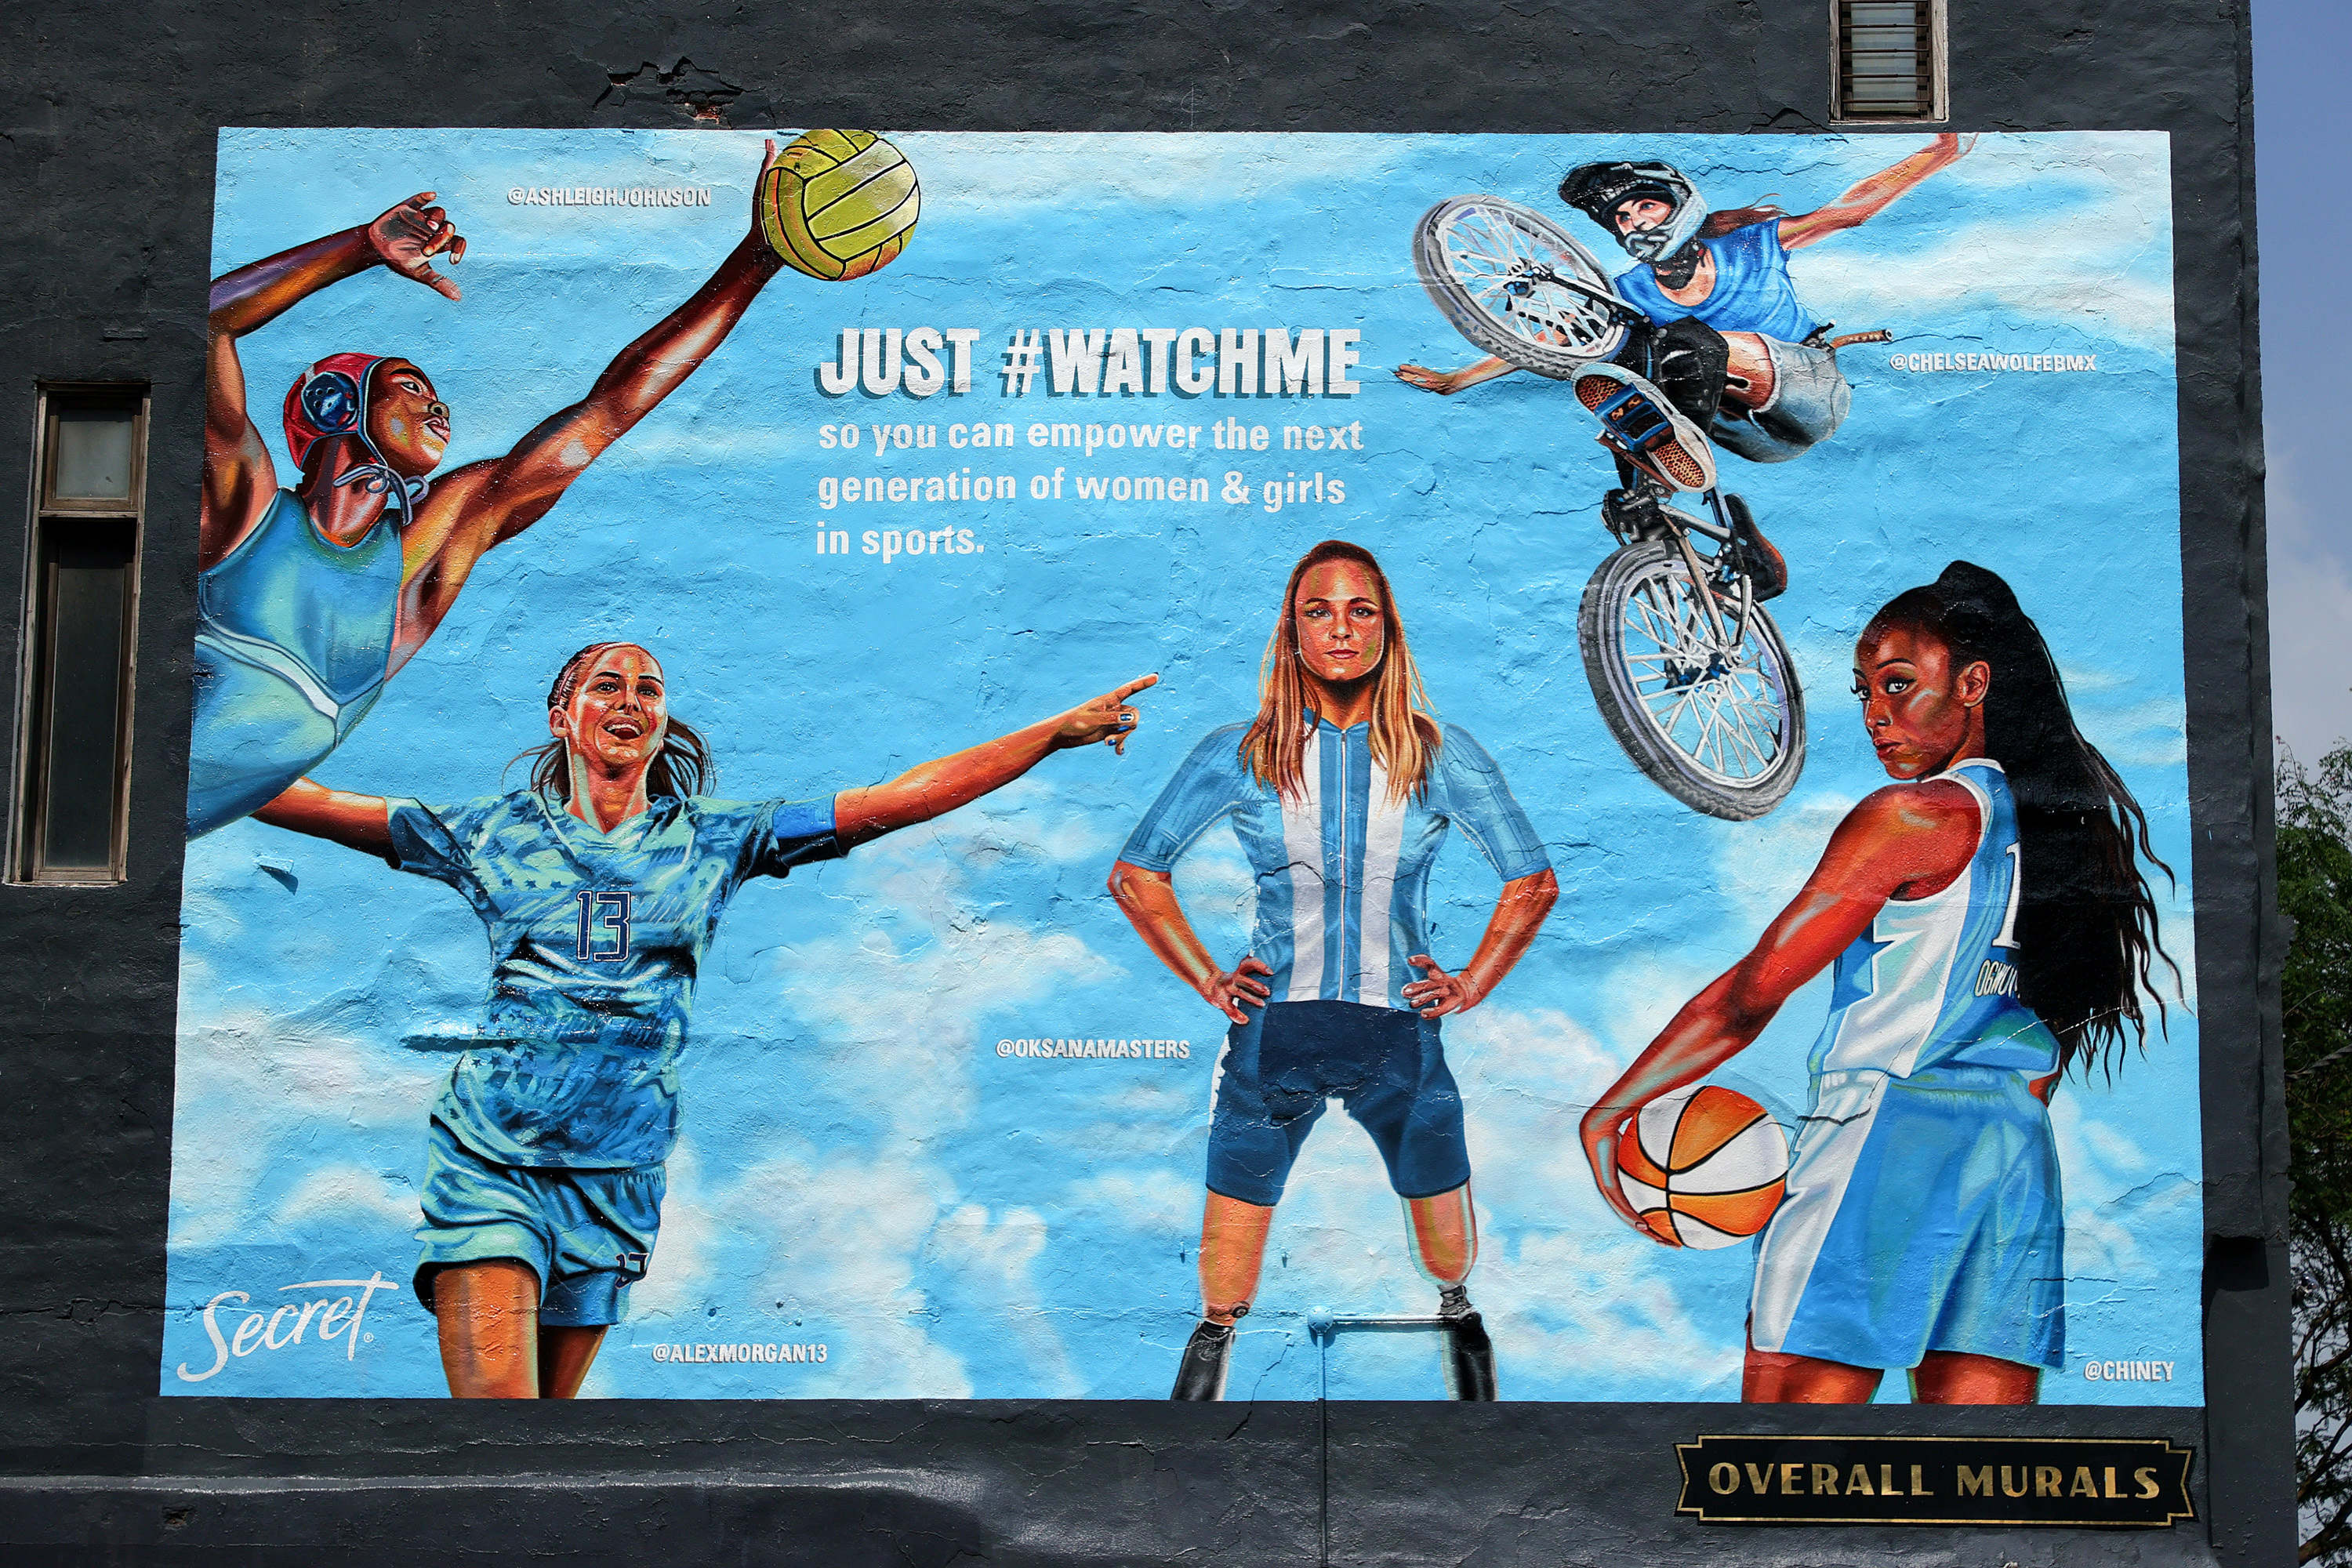 The Future of Women's Sports Is in Our Hands: Secret Deodorant Launches  “Just #WatchMe” Campaign to Empower and Support Girls and Women Athletes  Nationwide